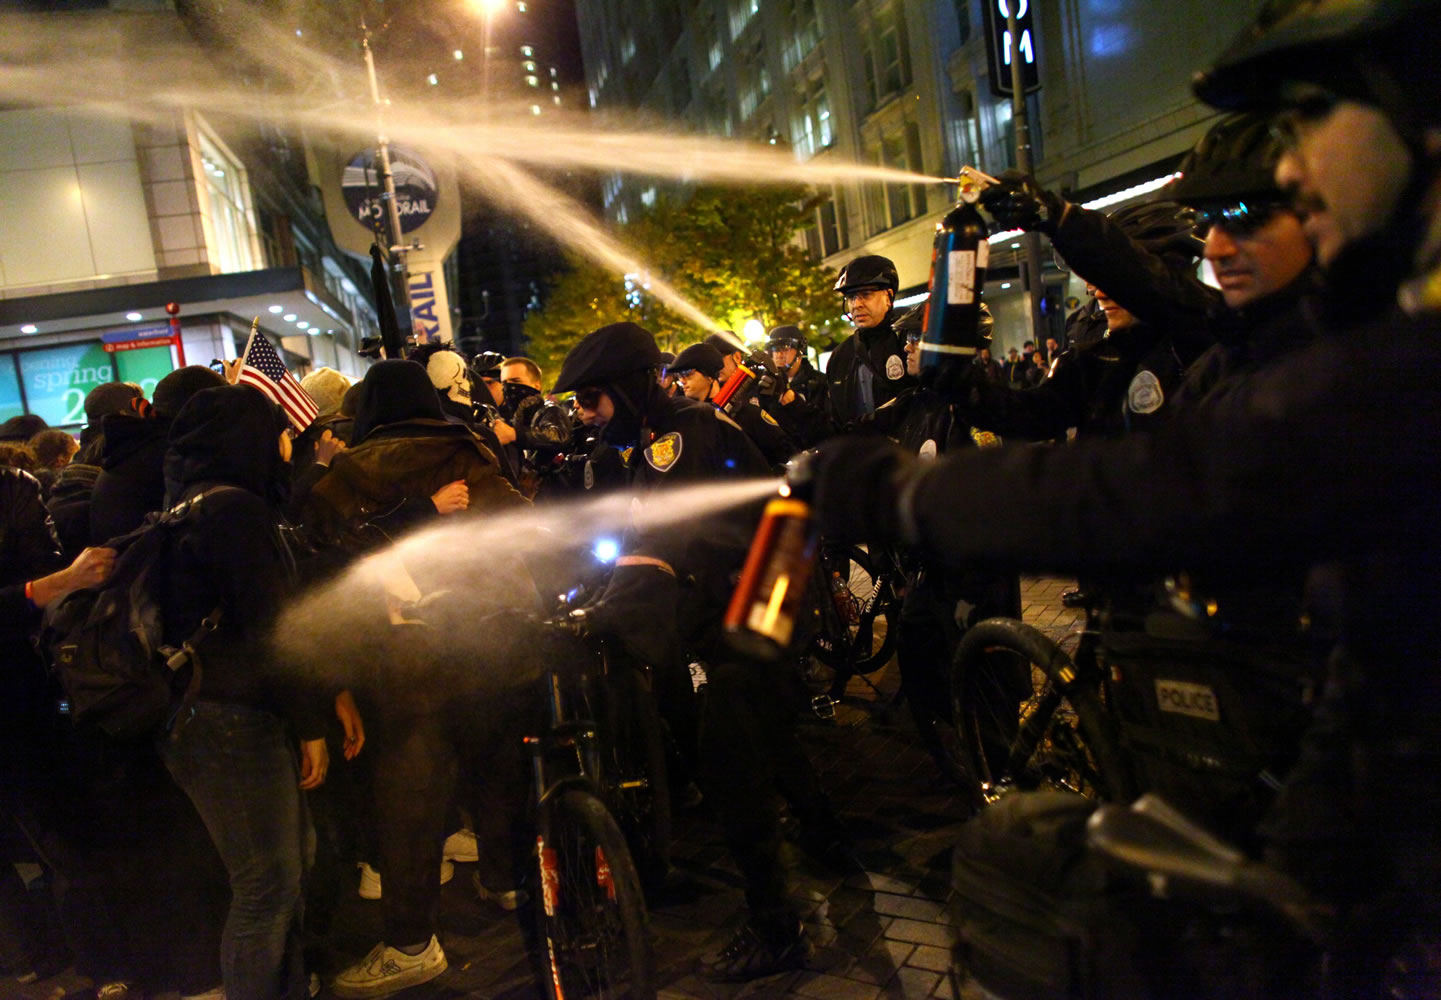 Seattle Police officers deploy pepper spray into a crowd during an Occupy Seattle protest on Tuesday at Westlake Park in Seattle.